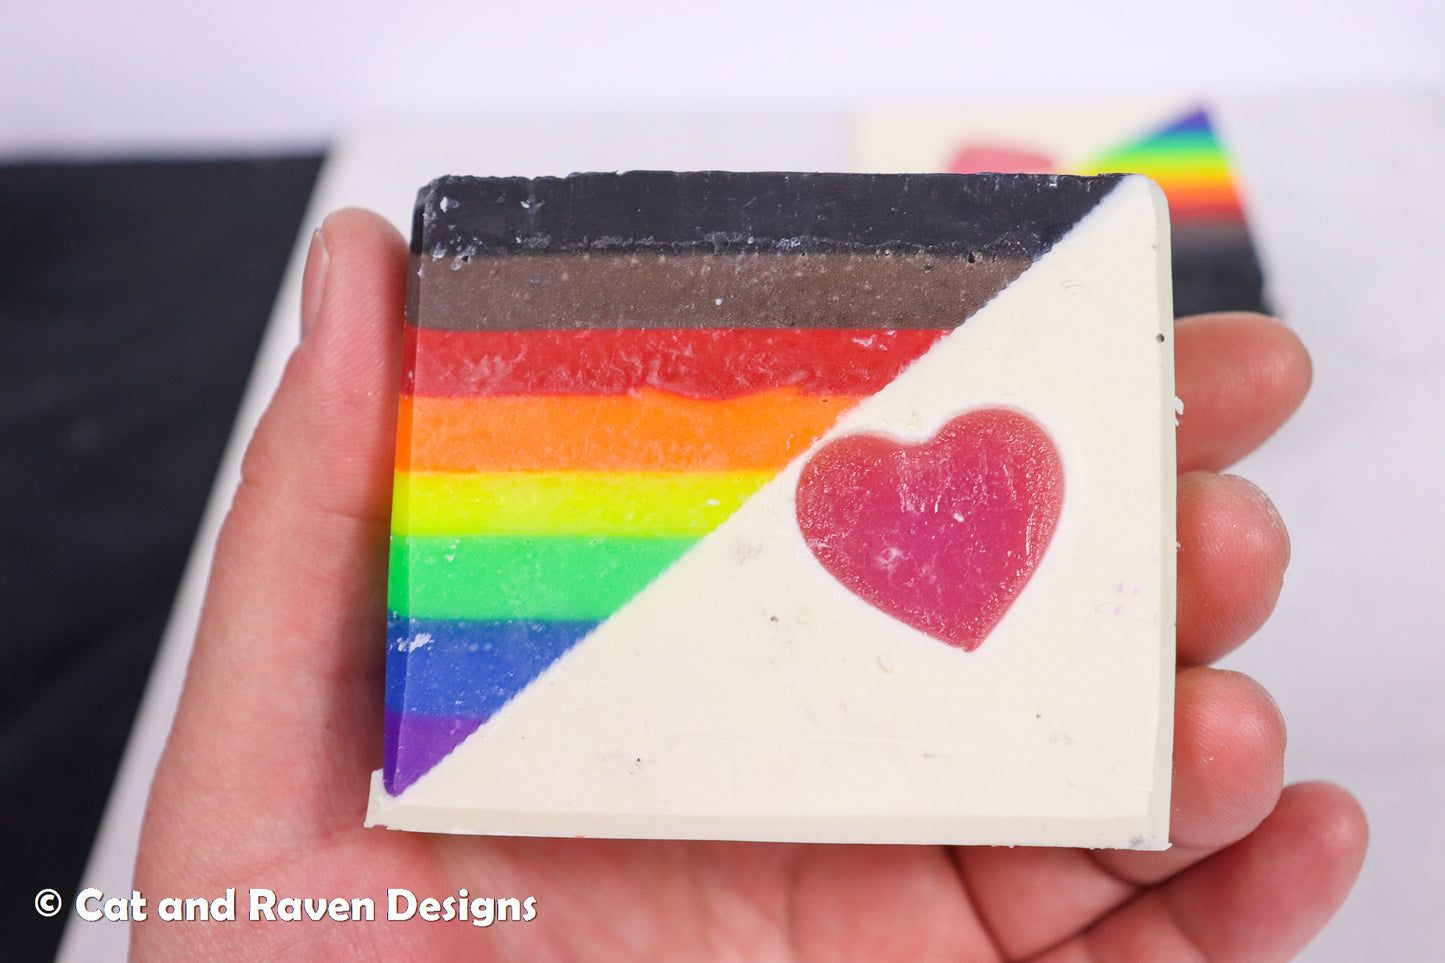 All Together Now (inclusive pride flag) soap